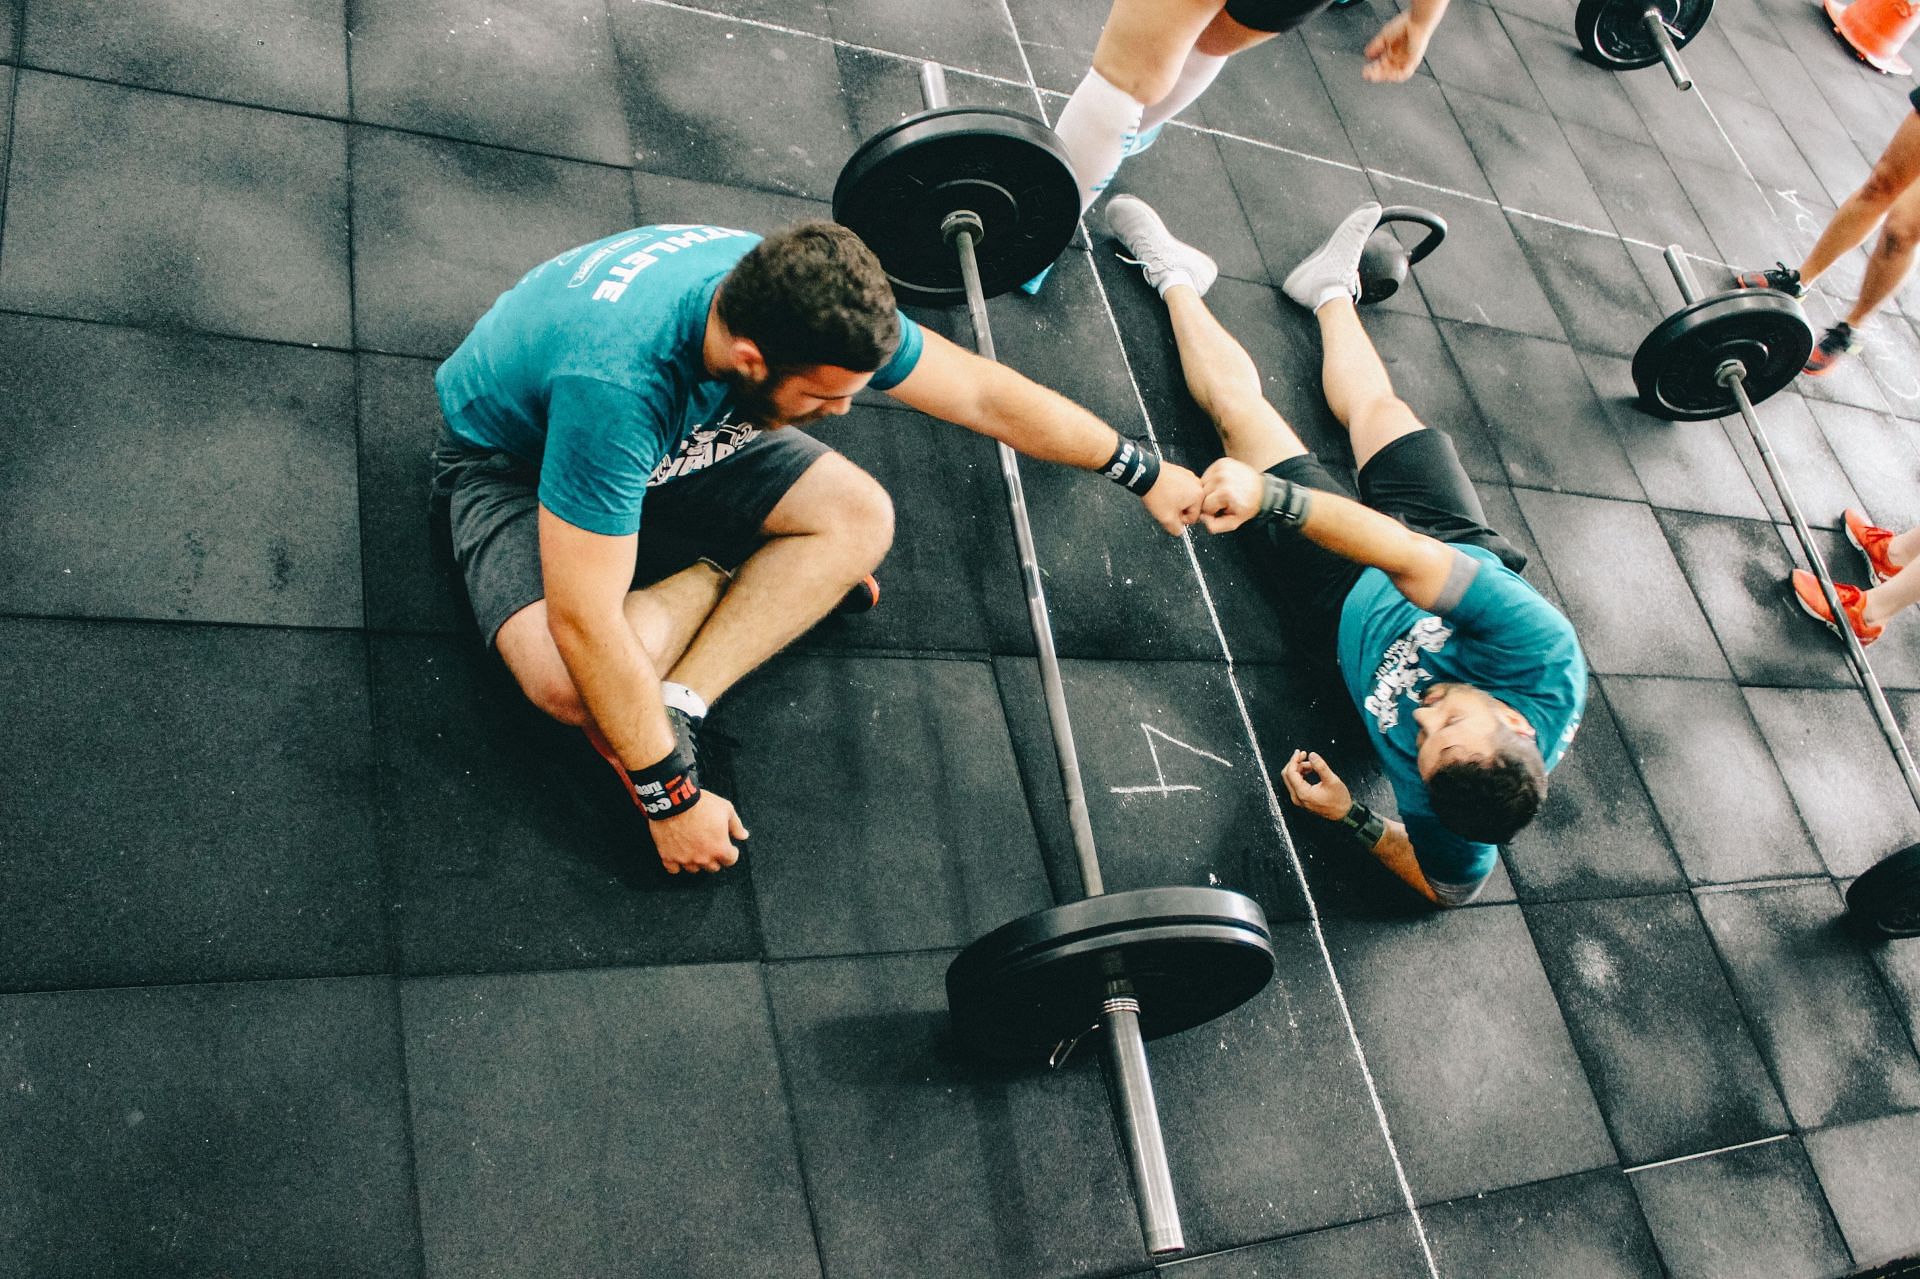 The personal record for a weightlifter might be the heaviest weight they have successfully lifted in a certain exercise (Photo by Victor Freitas on Unsplash)